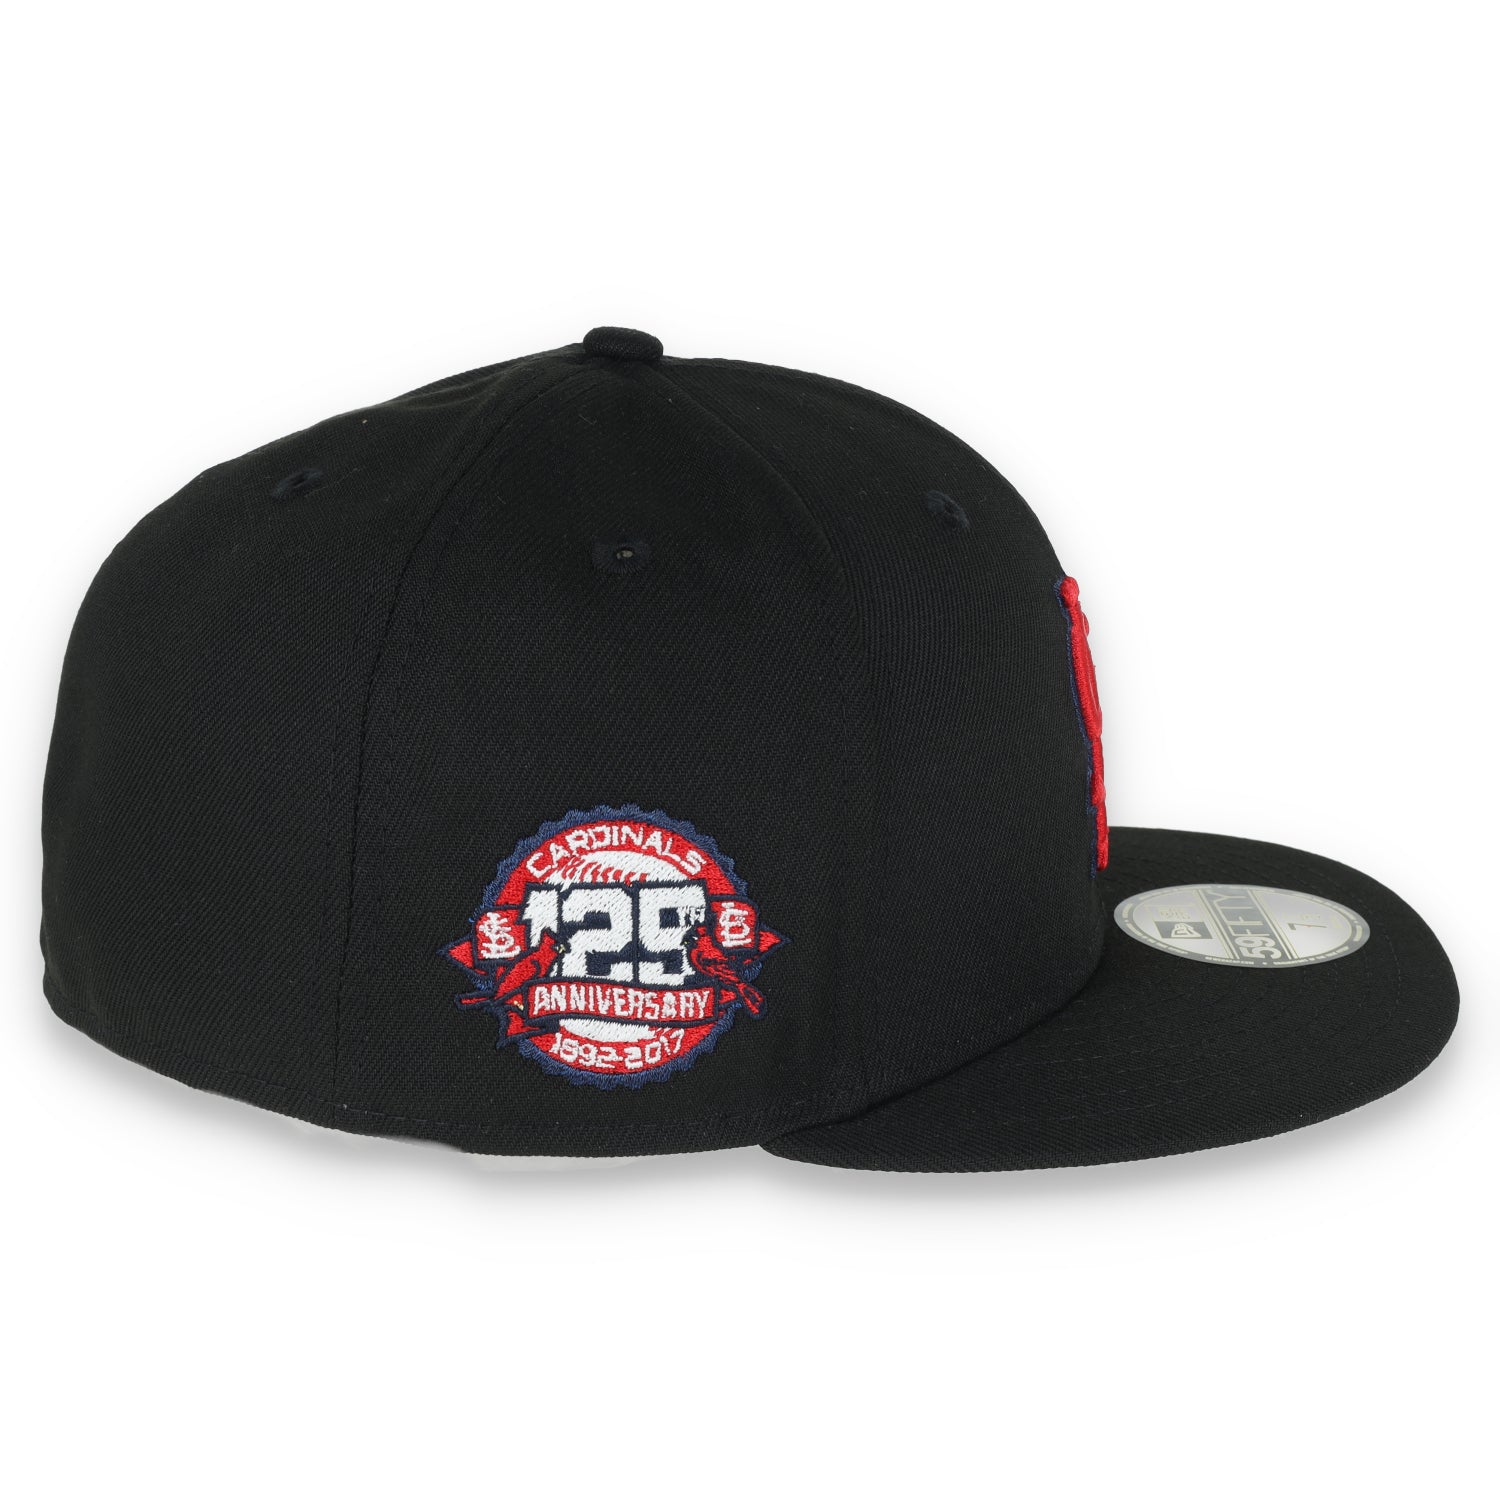 New Era St. Louis Cardinals Metallic Logo 129 Anniversary Side Patch 59FIFTY Fitted - Black